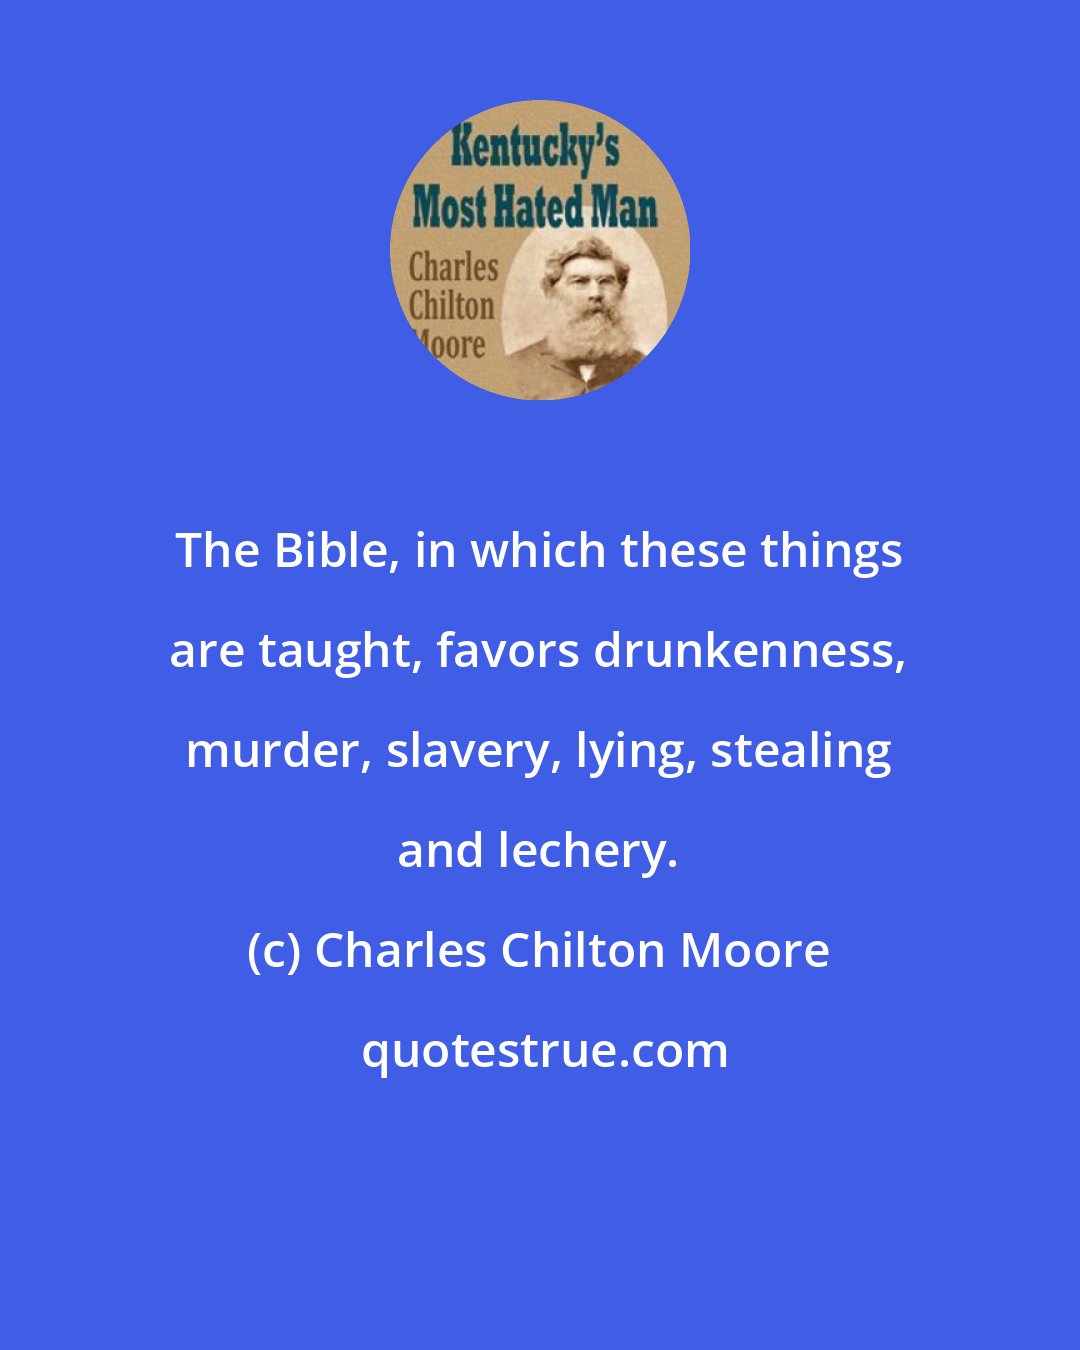 Charles Chilton Moore: The Bible, in which these things are taught, favors drunkenness, murder, slavery, lying, stealing and lechery.